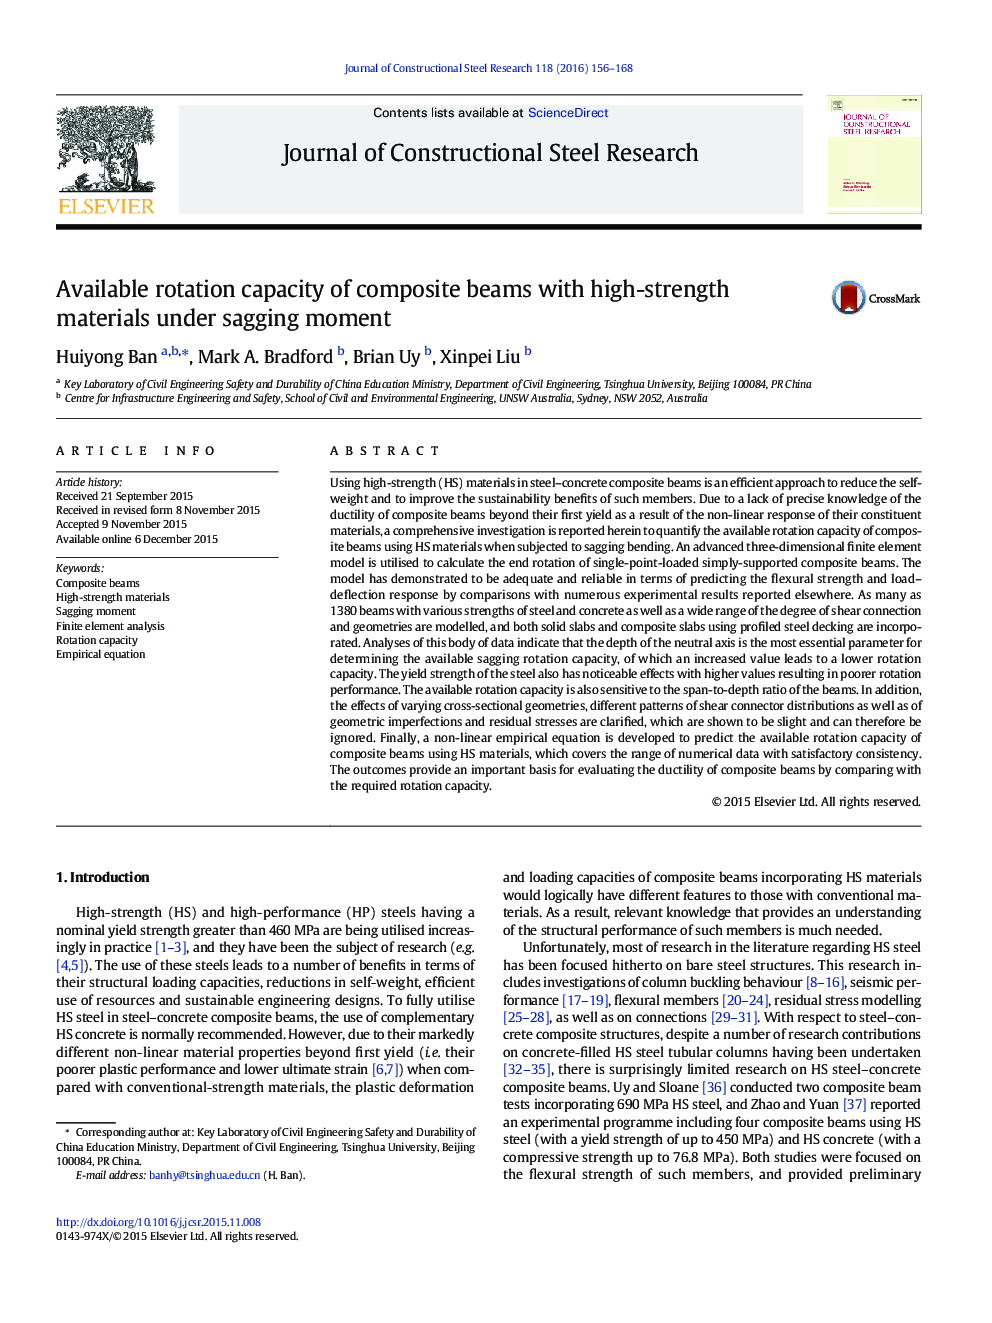 Available rotation capacity of composite beams with high-strength materials under sagging moment